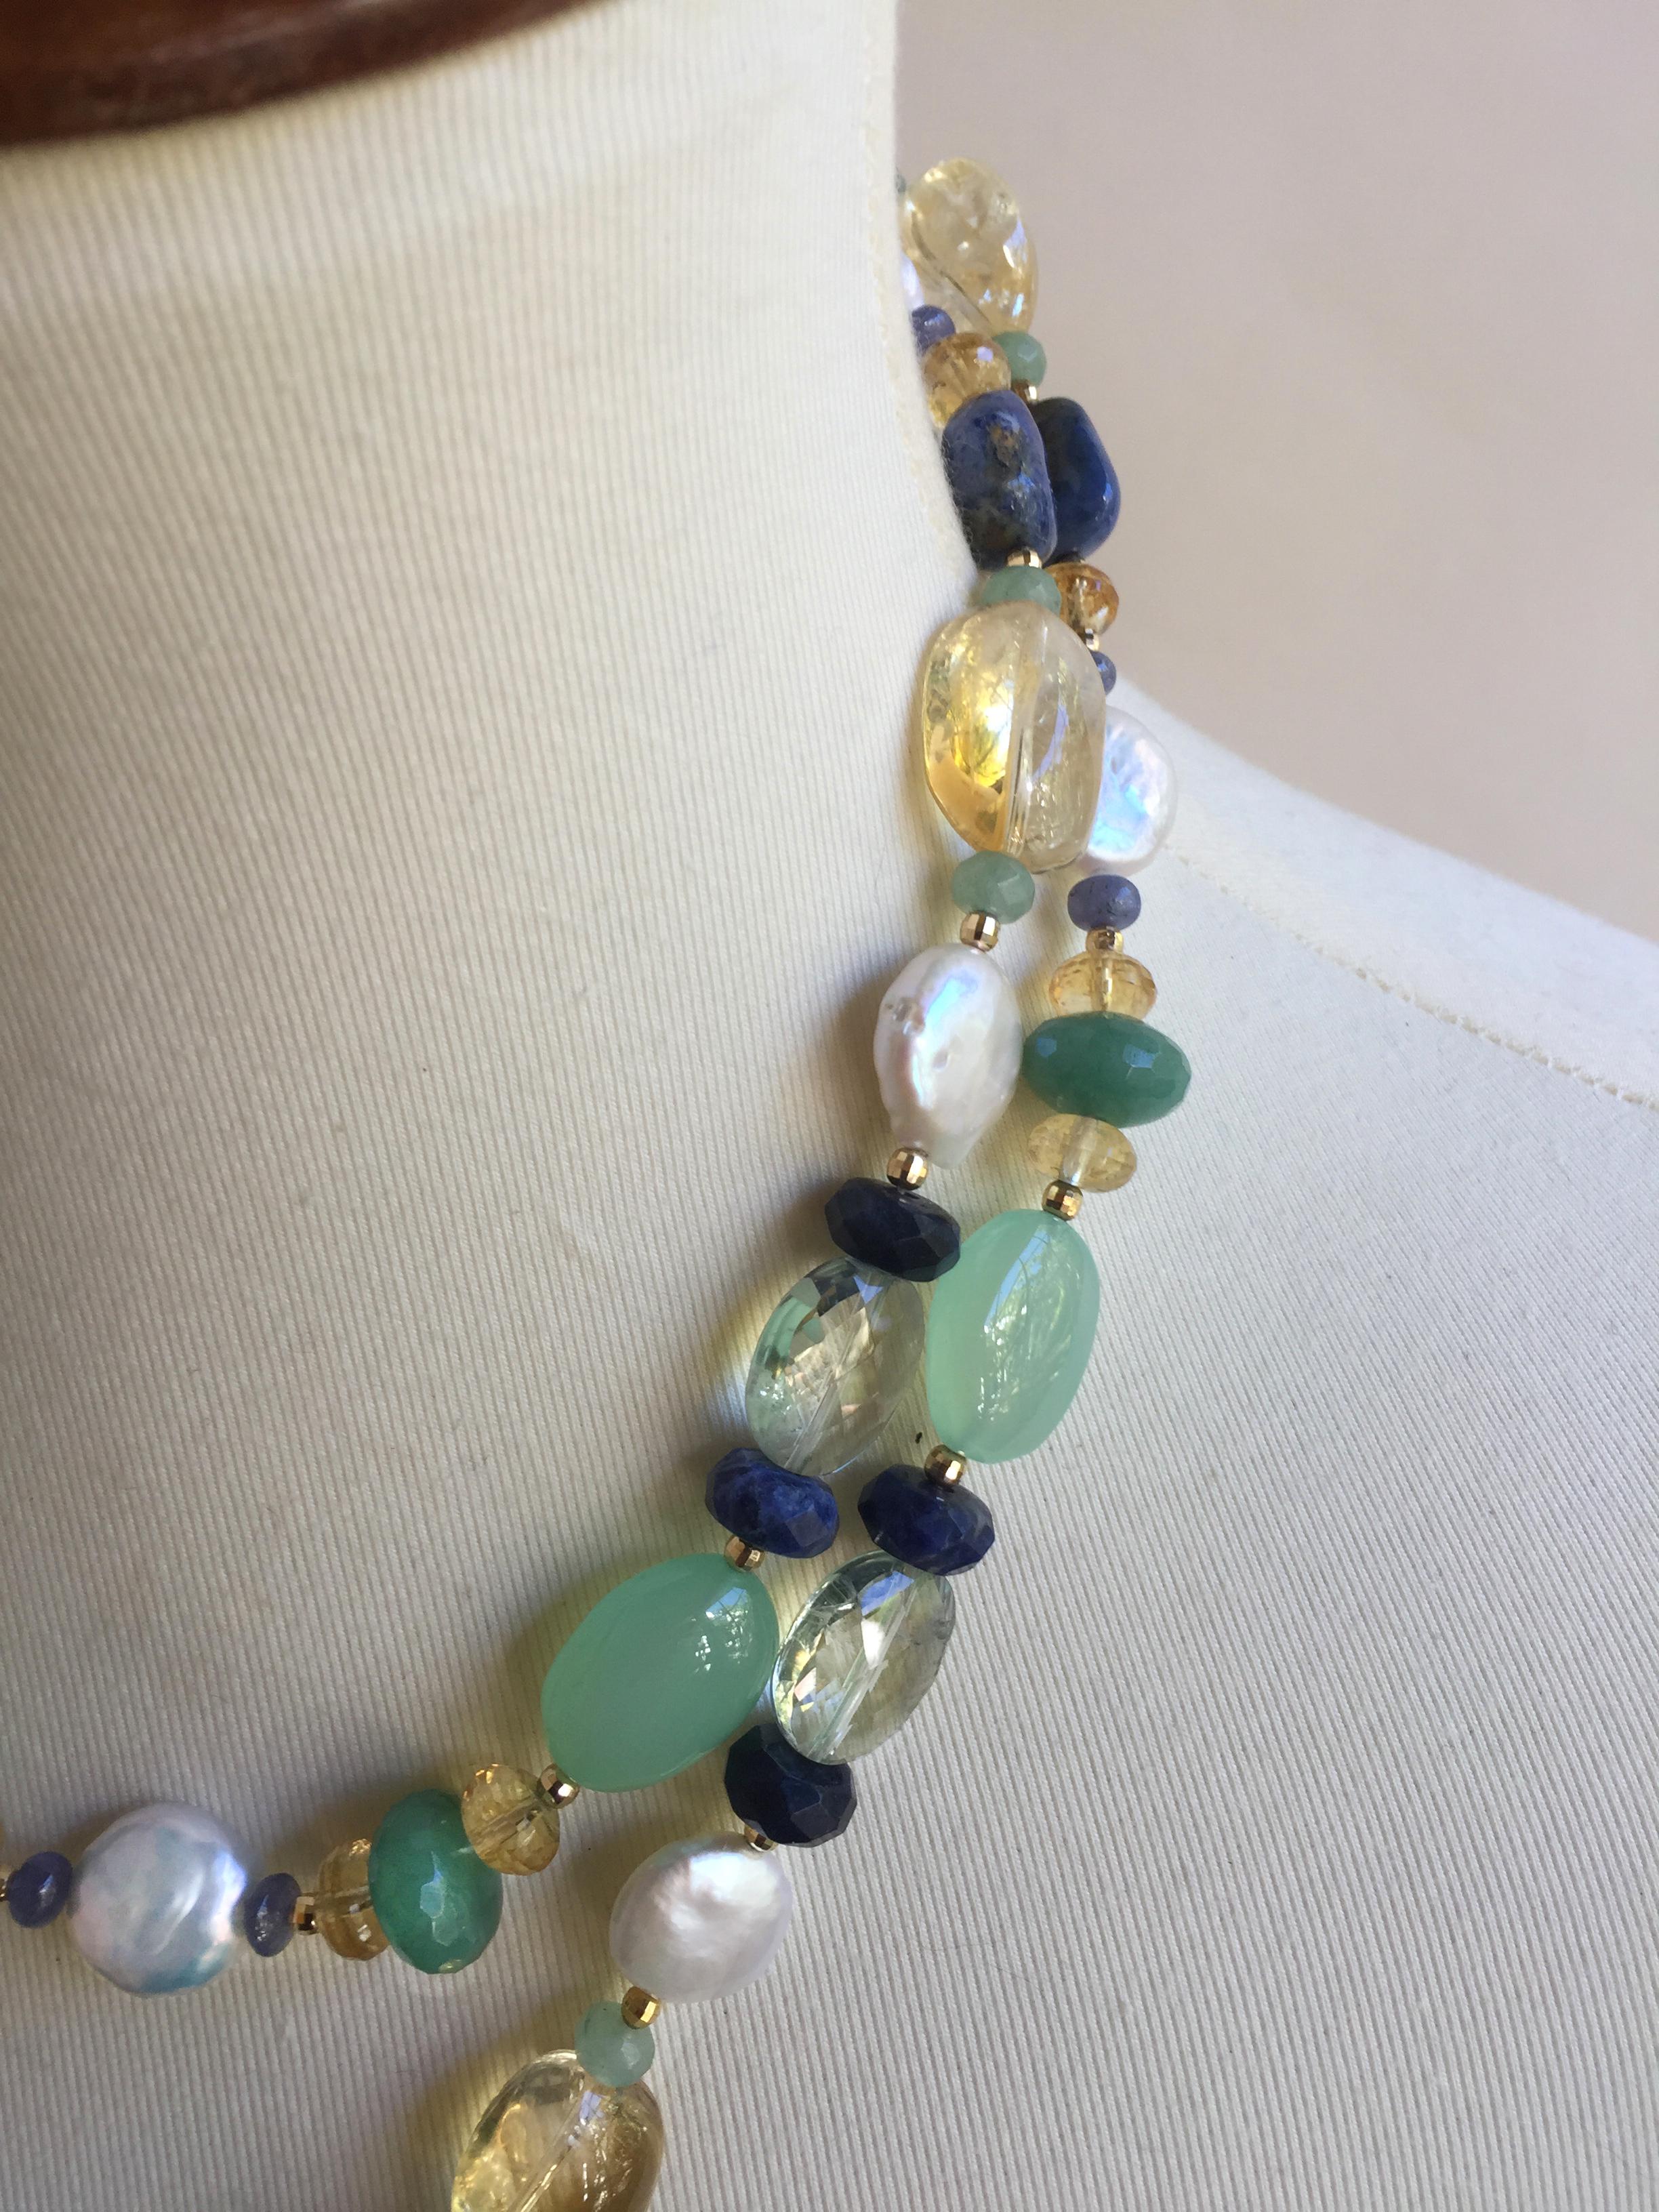 The glowing white pearls come together beautifully with multi color semi precious stone in this necklace and tassel with 14k yellow gold. Composed of faceted citrine, labordite, tanzanite, lapis lazuli, green agate, apatite, and 14k yellow gold